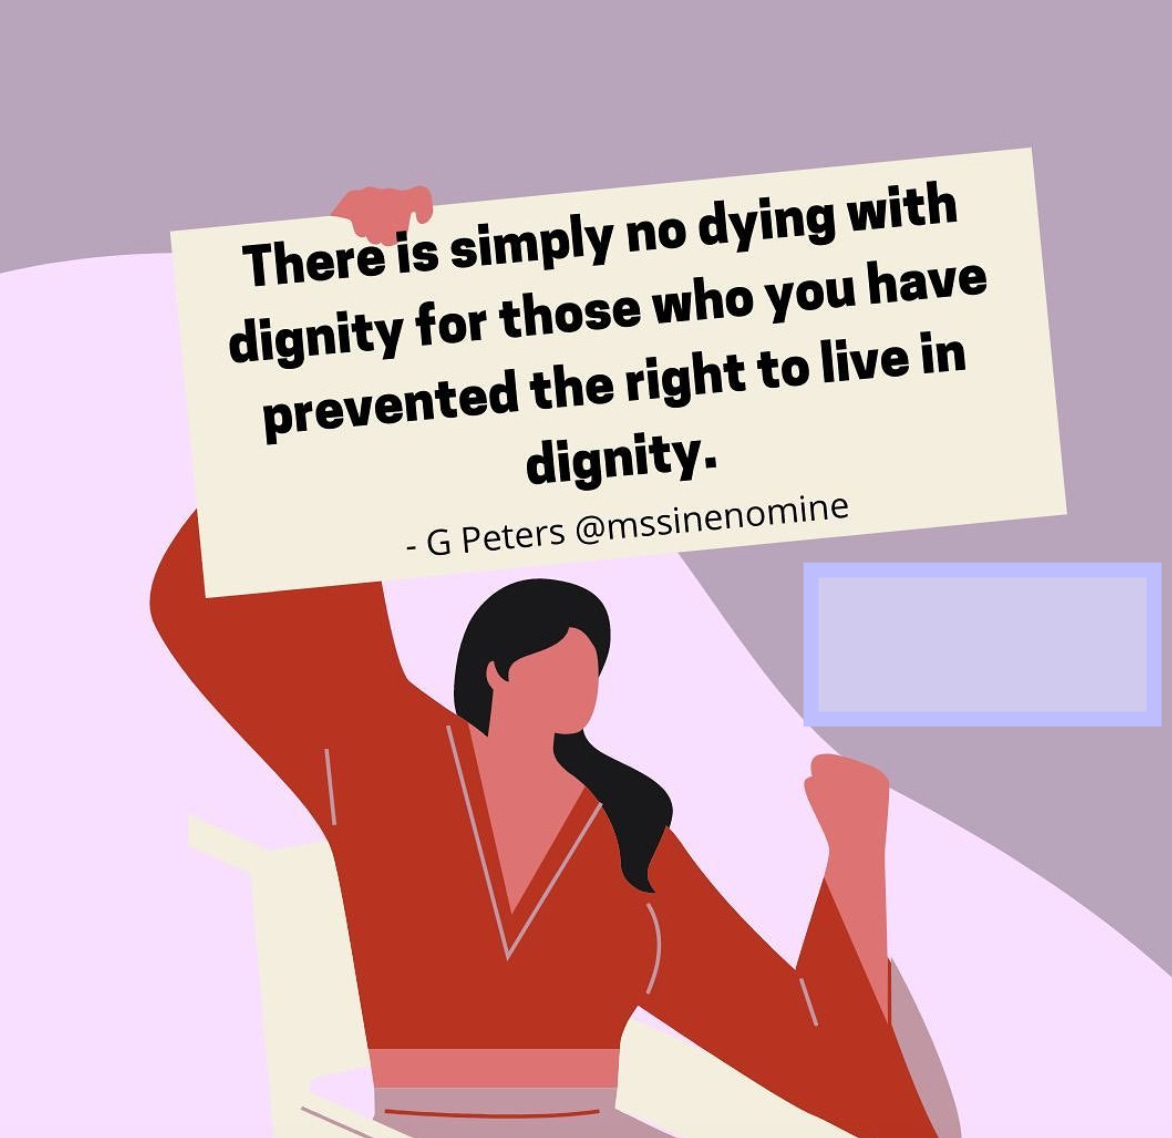 A person with long black hair wearing a v-neck shirt sitting on a grey-white wheelchair. They are holding a picket sign that says: There is simply no dying with dignity for those who you have prevented the right to live in dignity. By G Peters @mssinenomine on Twitter.